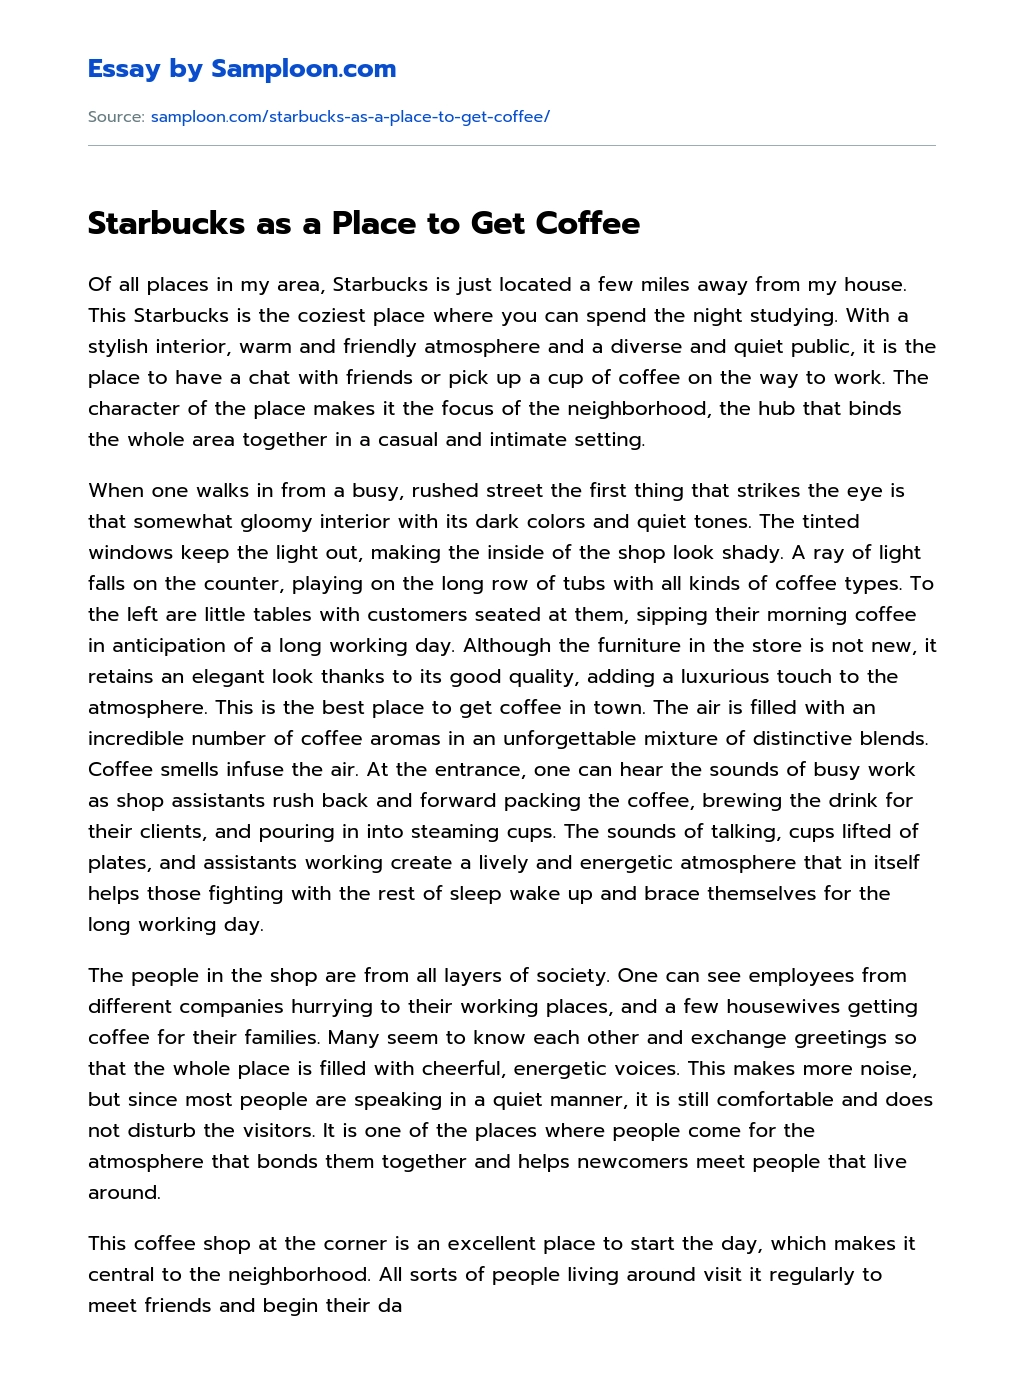 Starbucks as a Place to Get Coffee essay